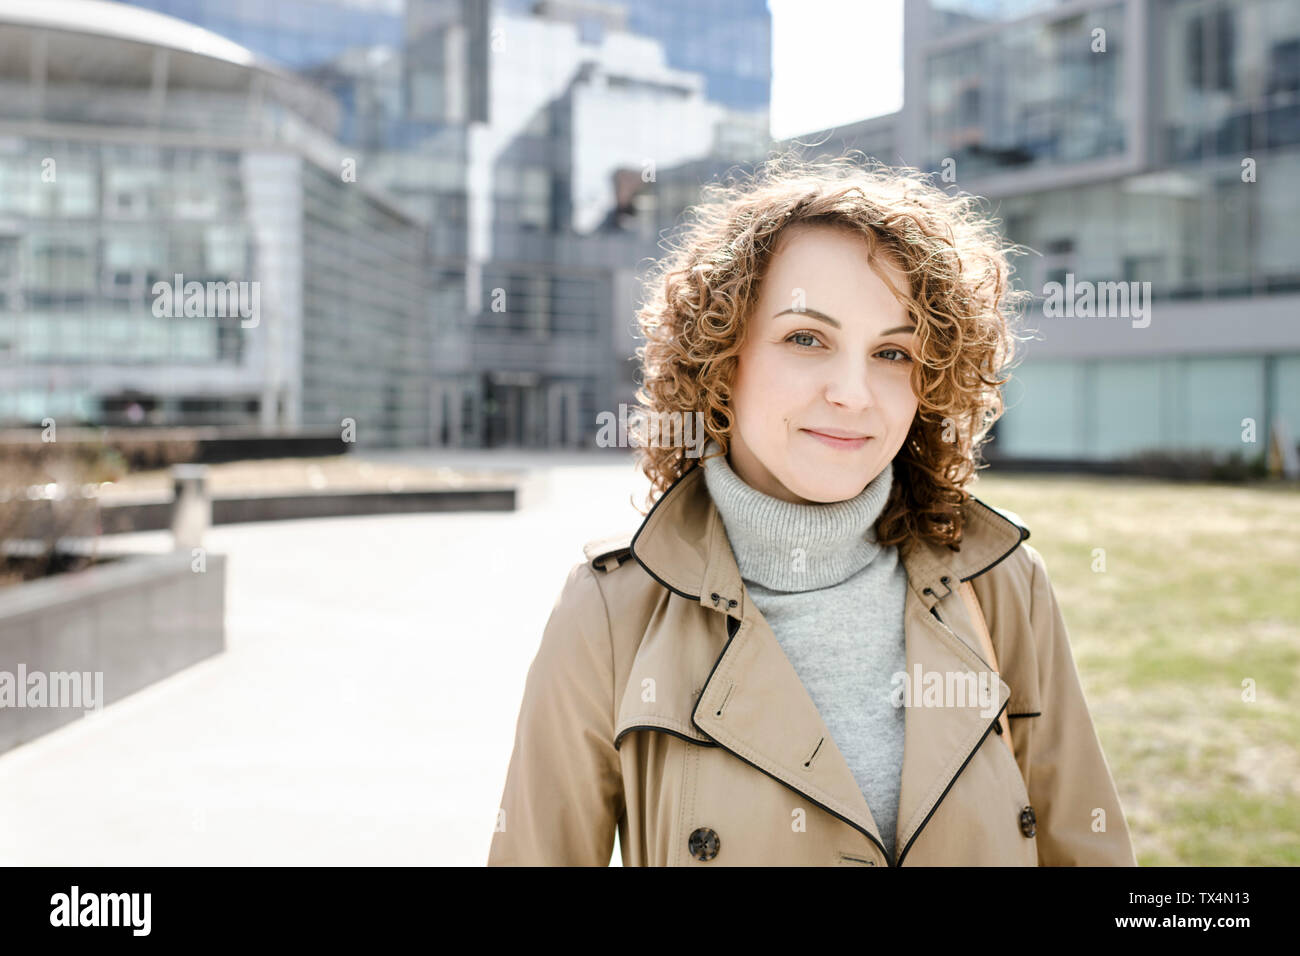 Portrait of smiling woman with curly hair wearing beige trenchcoat and turtleneck pullover Stock Photo